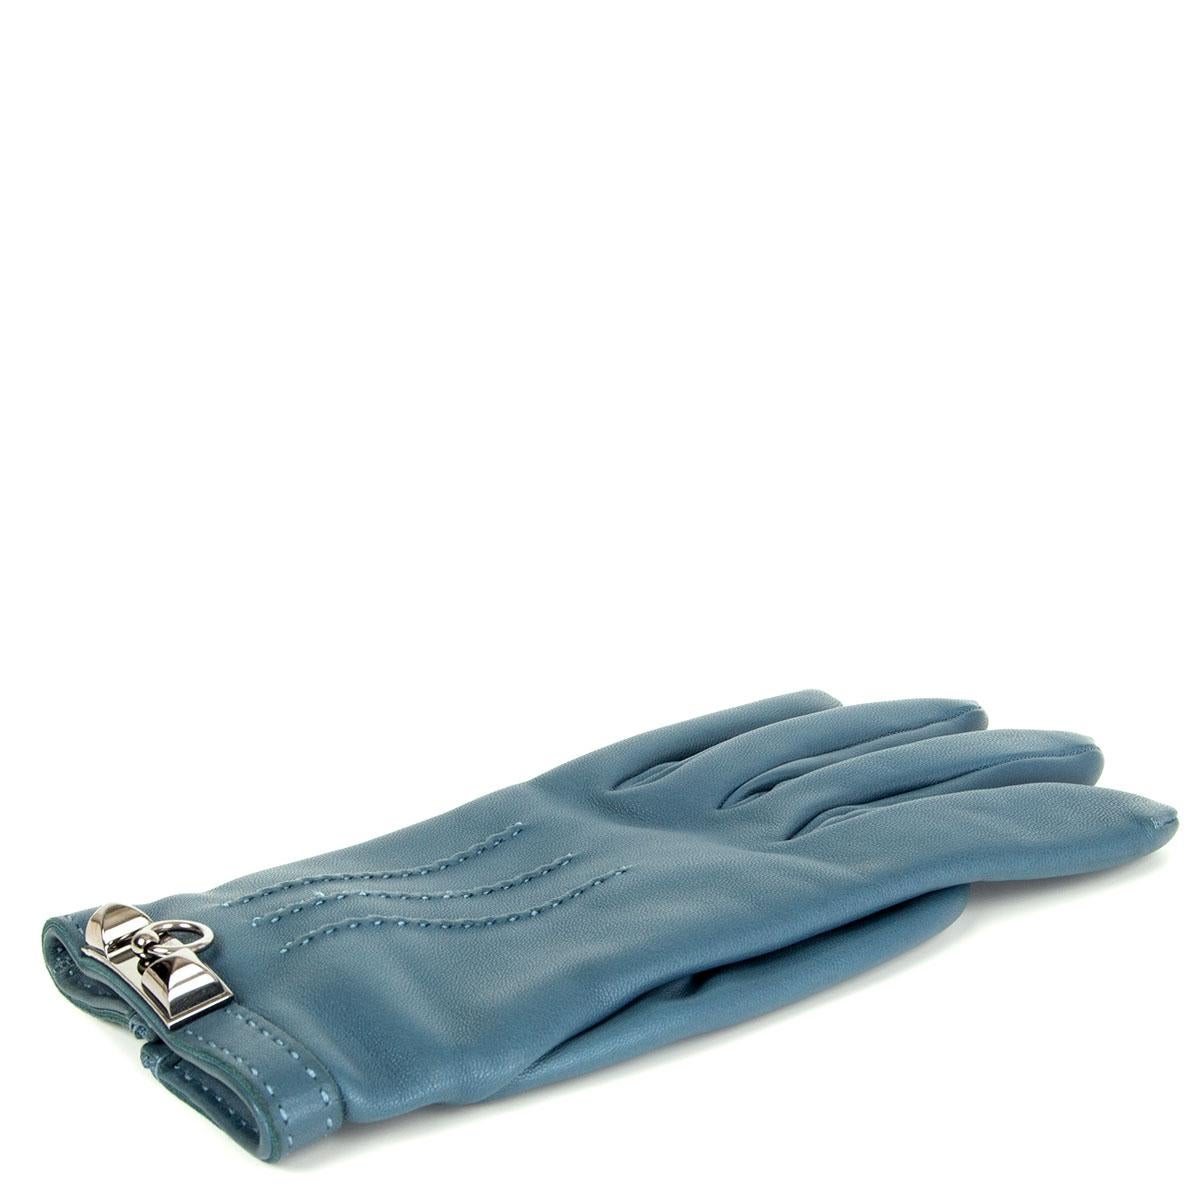 Hermès 'Collier de Chien' gloves in petrol leather with Palladium hardware. Lined in taupe cashmere. Have been worn with a few faint visible scratches on the hardware. Overall in excellent condition. 

Tag Size 8 
Inside Circumference 17cm